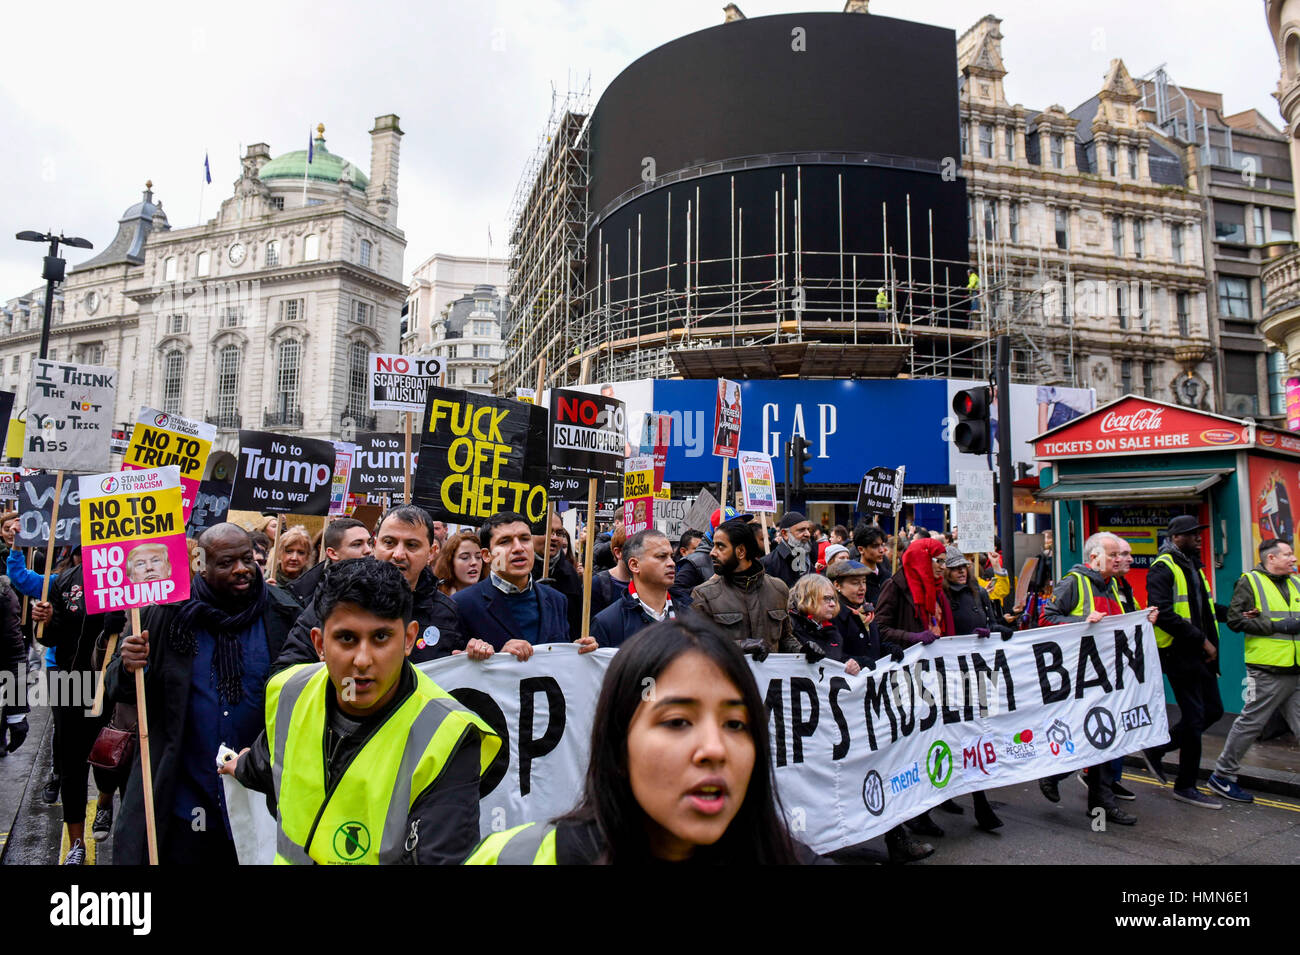 London, UK.  4 February 2017.  Thousands of people, standing against racism and Islamophobia, are seen at Piccadilly Circus, marching from the U.S. Embassy to Whitehall to oppose the travel ban on Muslims, from seven countries, imposed by Donald Trump, U.S. President.  © Stephen Chung / Alamy Live News Stock Photo